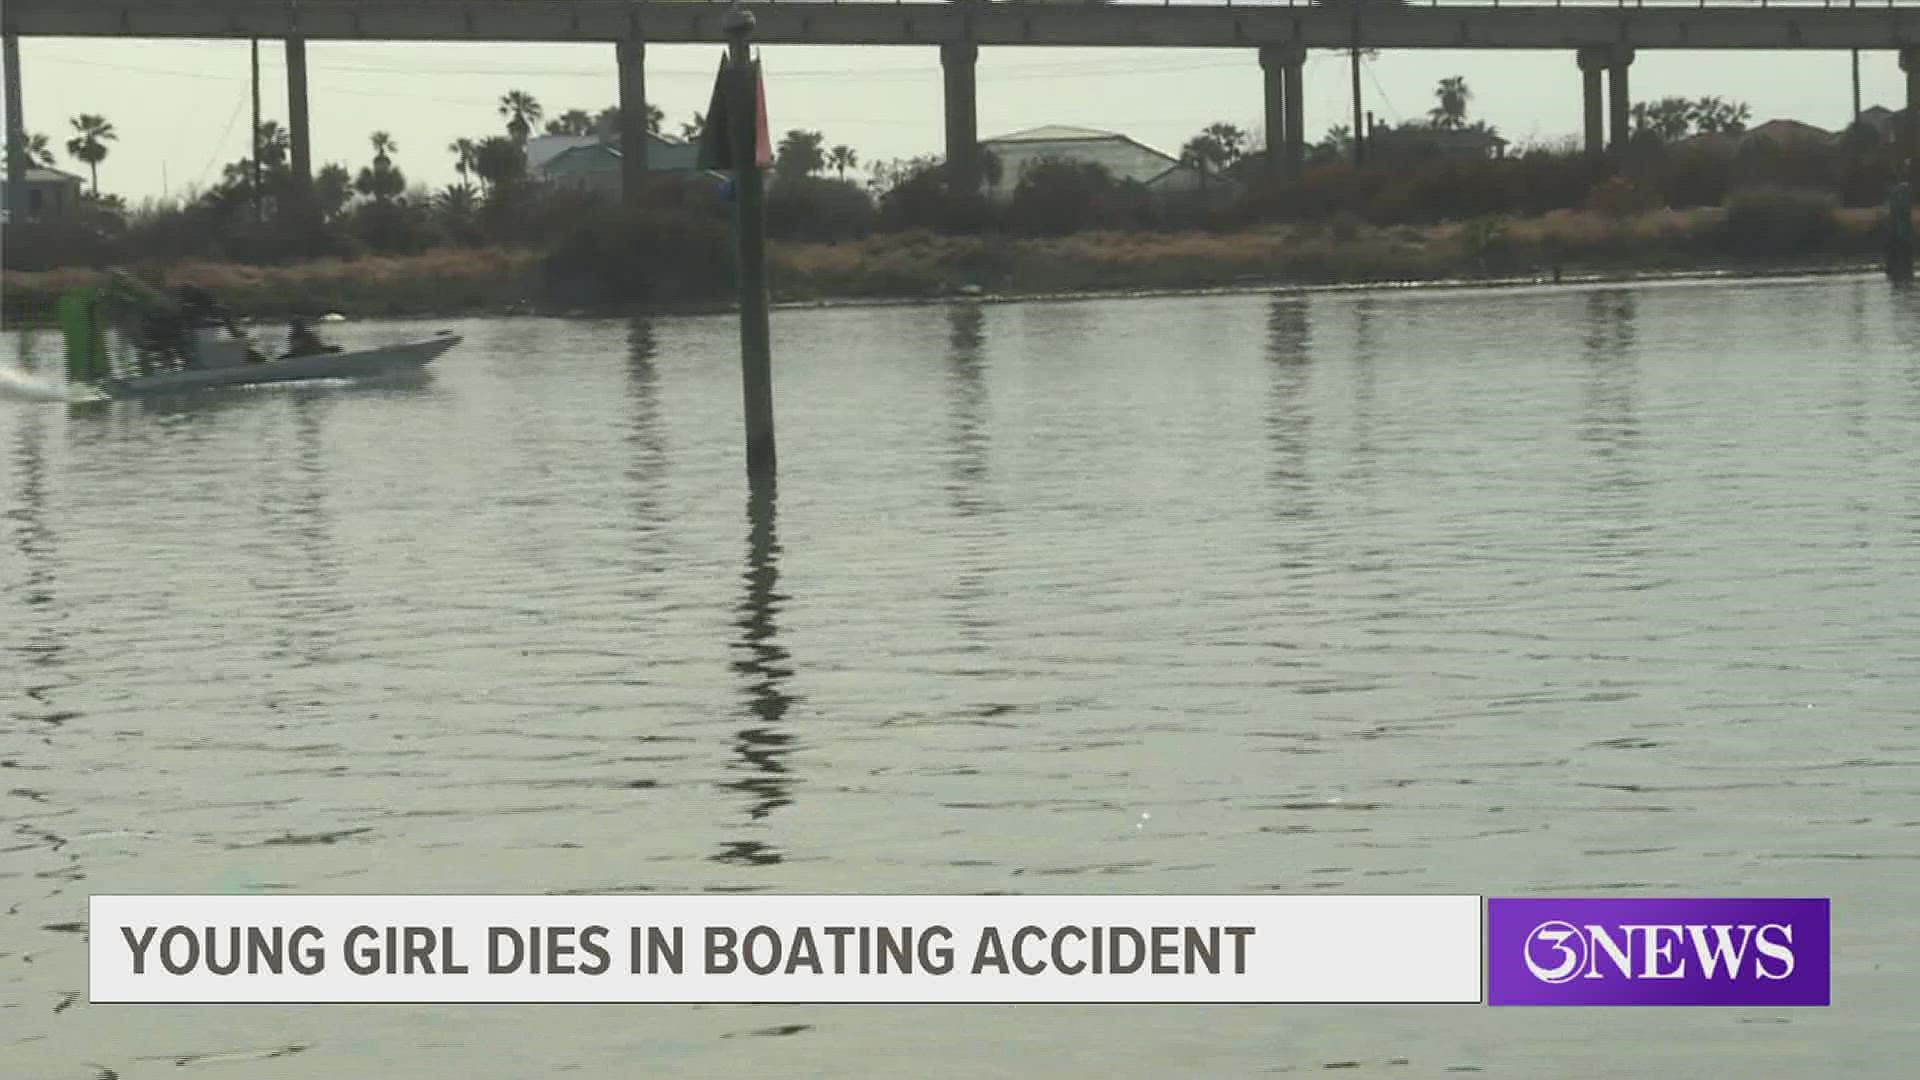 Officials said the girl was thrown from an airboat and was pronounced dead at a Rockport emergency room.